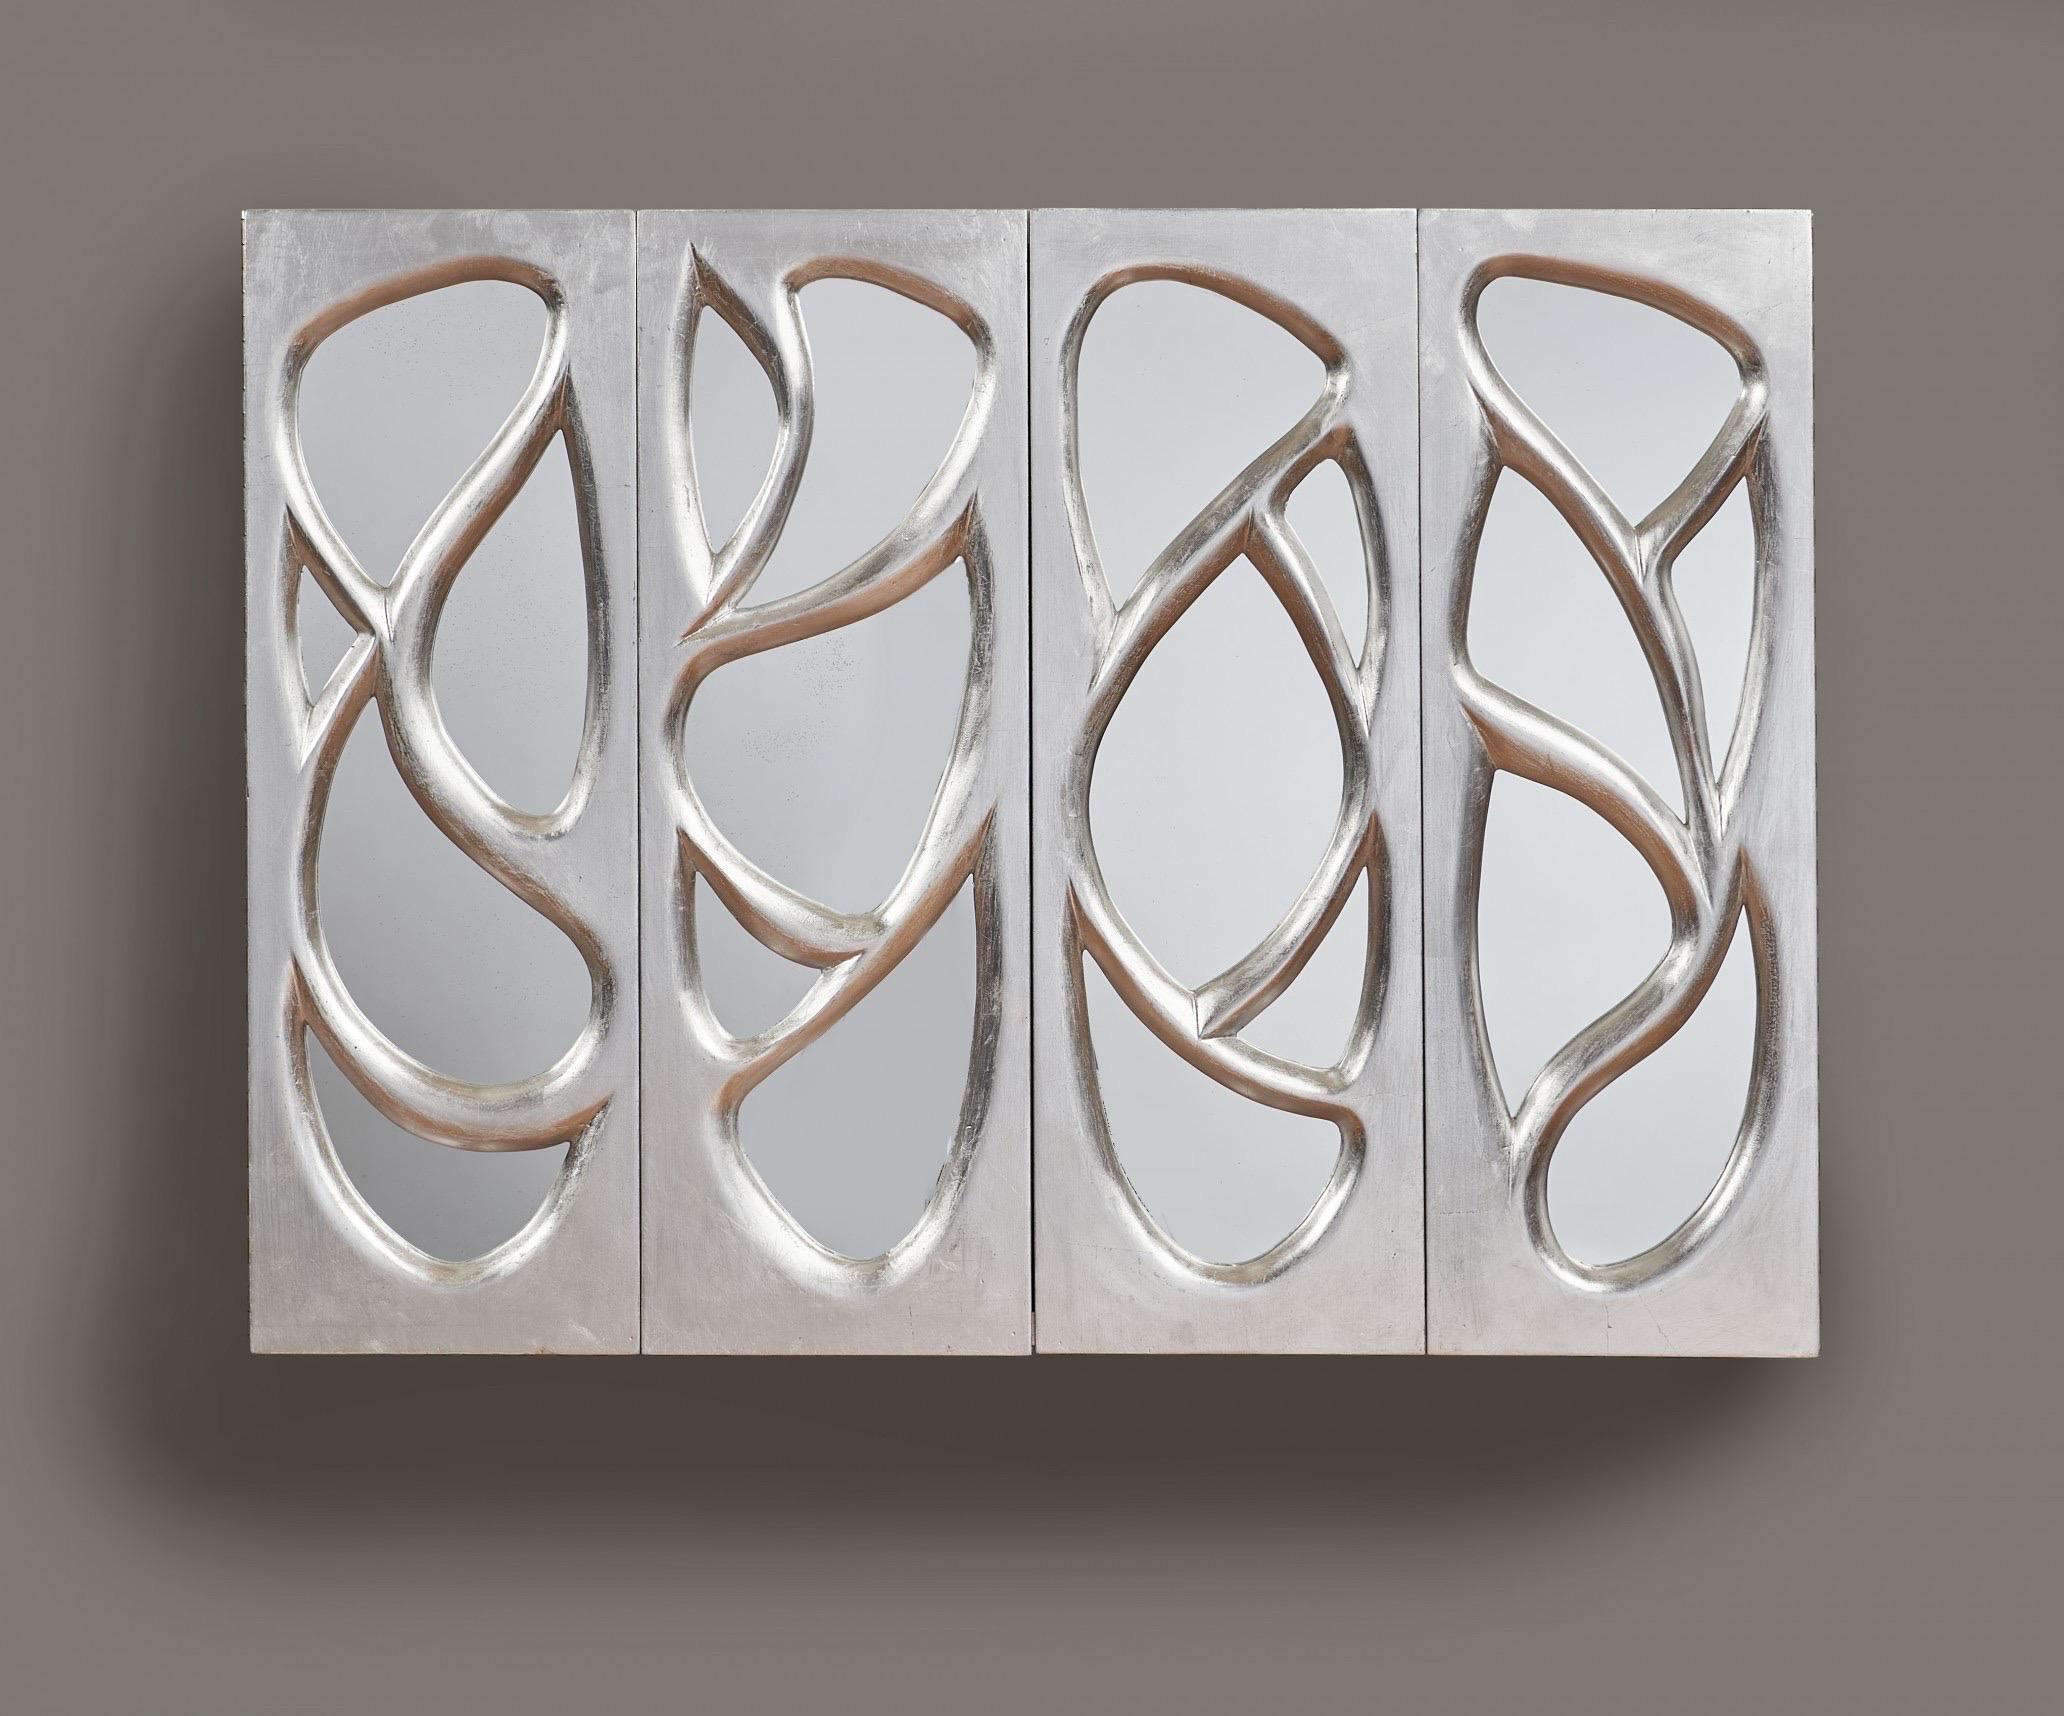 Phillip Lloyd Powell (1919-2008)

A rare and astounding hanging cabinet by Pennsylvania Studio Craft movement master Phillip Lloyd Powell, in sinuously sculpted wood covered in silver-leaf with mirrored inserts. With two hinged doors and a single